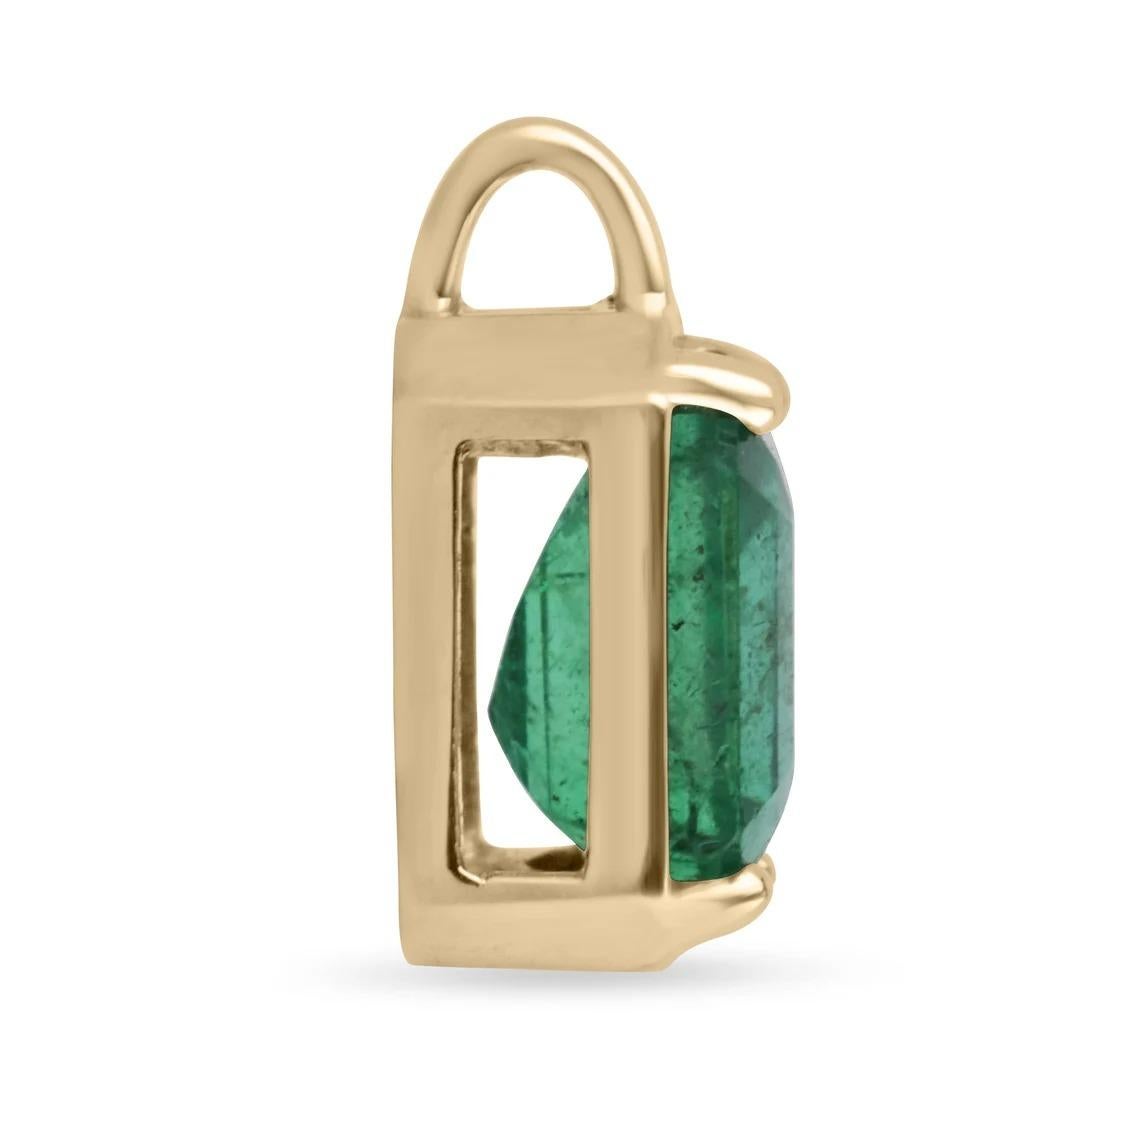 Featured here is a stunning emerald cut Zambian emerald necklace in fine 14K yellow gold. Displayed in the center is a dark-green emerald with very good clarity, accented by a simple four-prong gold mount, allowing for the emerald to be shown in